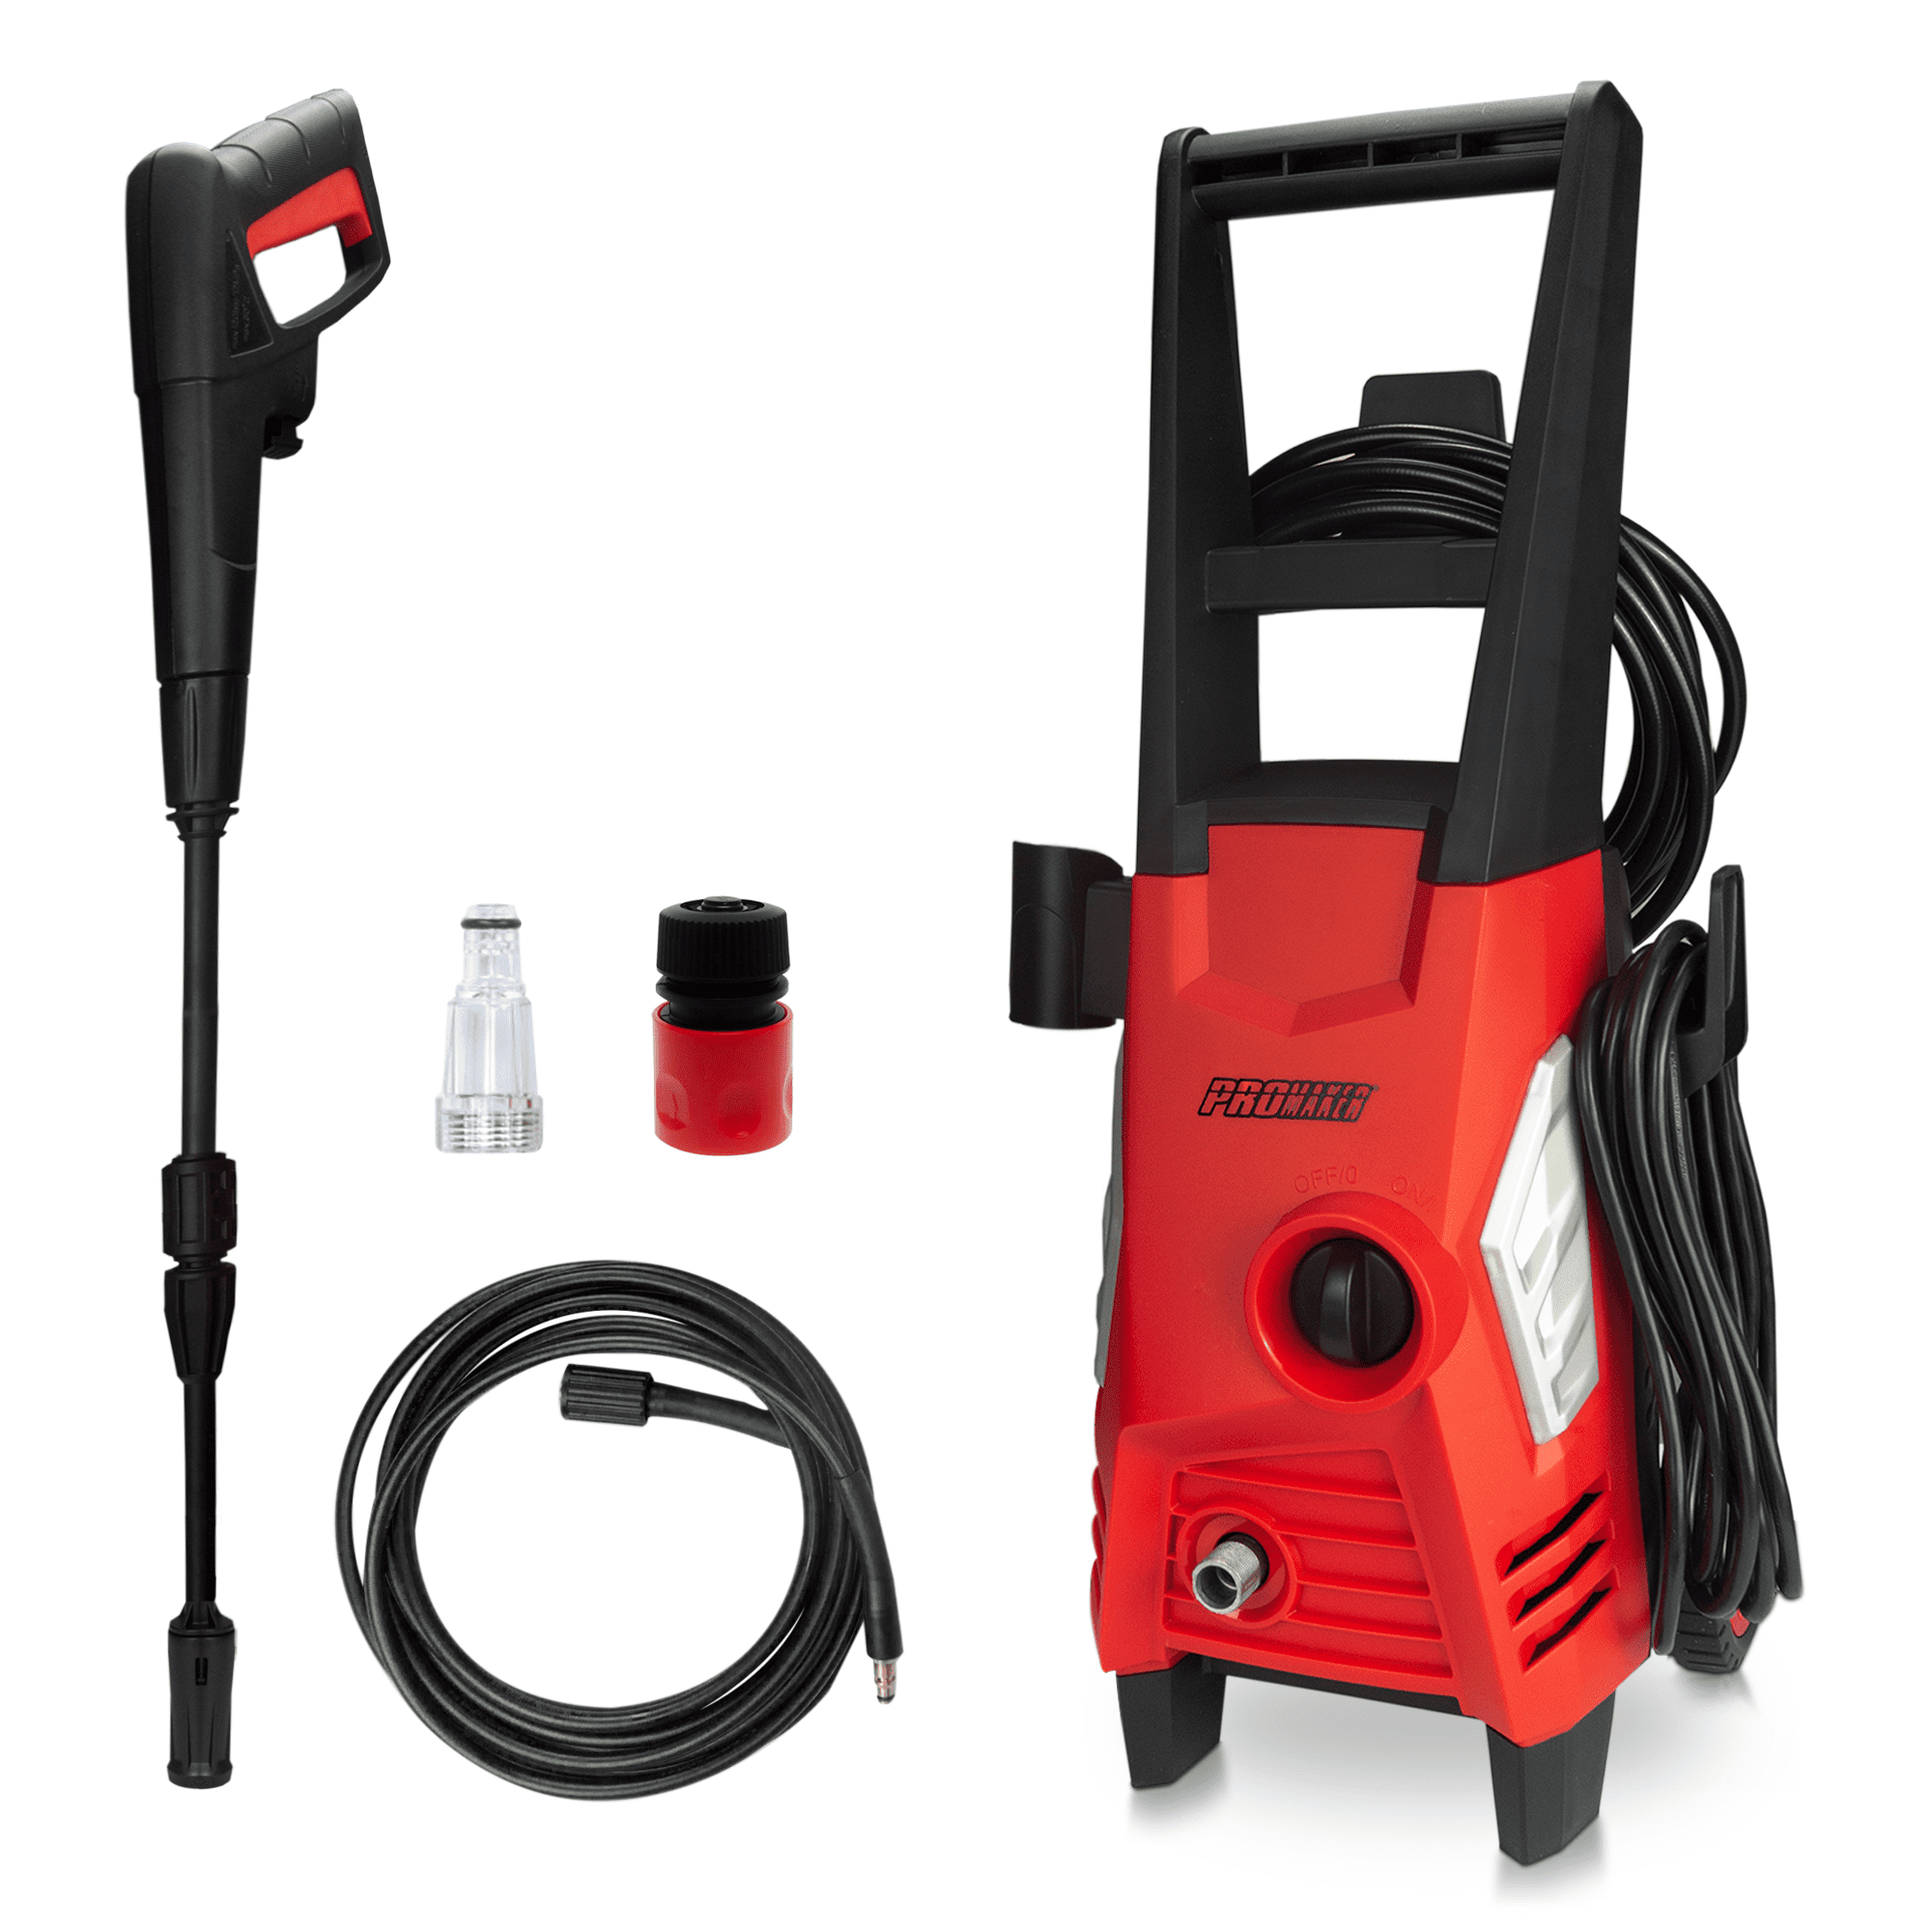 18" Flat Surface&Concrete Cleaner Pressure Washer 4000PSI/275BAR cold/hot Water 